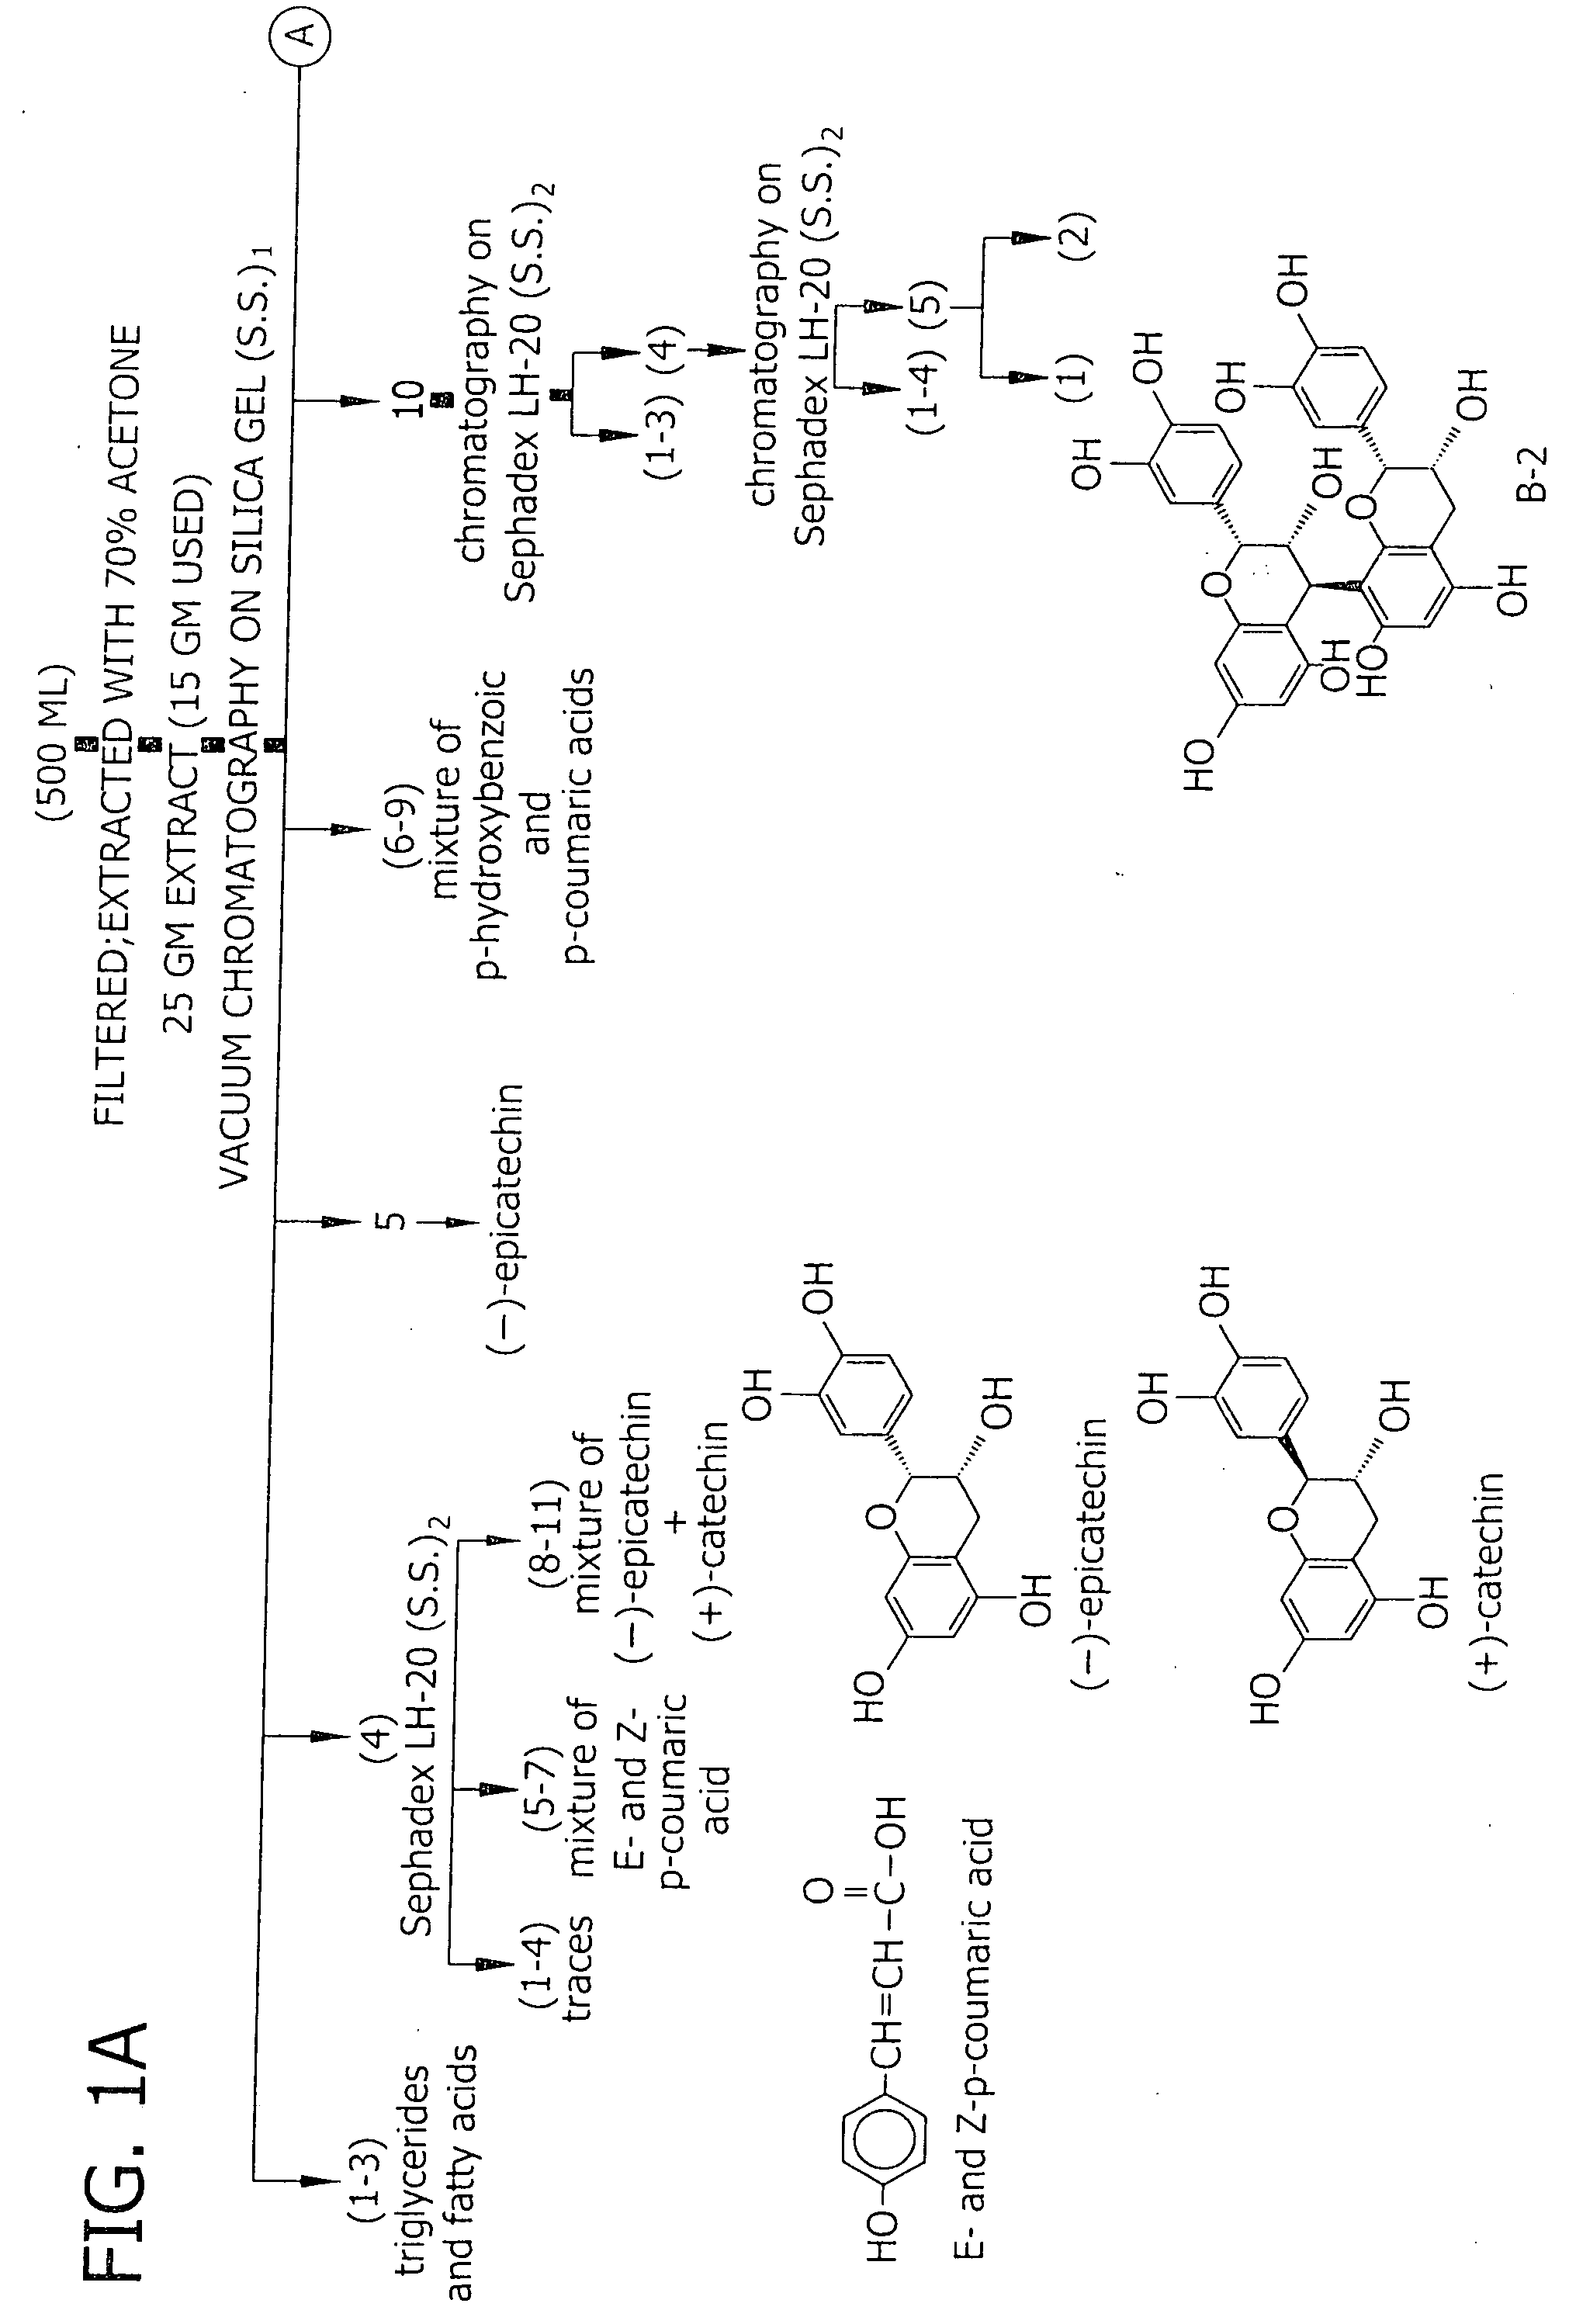 Methods for isolation of proanthocyanidins from flavonoid-producing cell culture